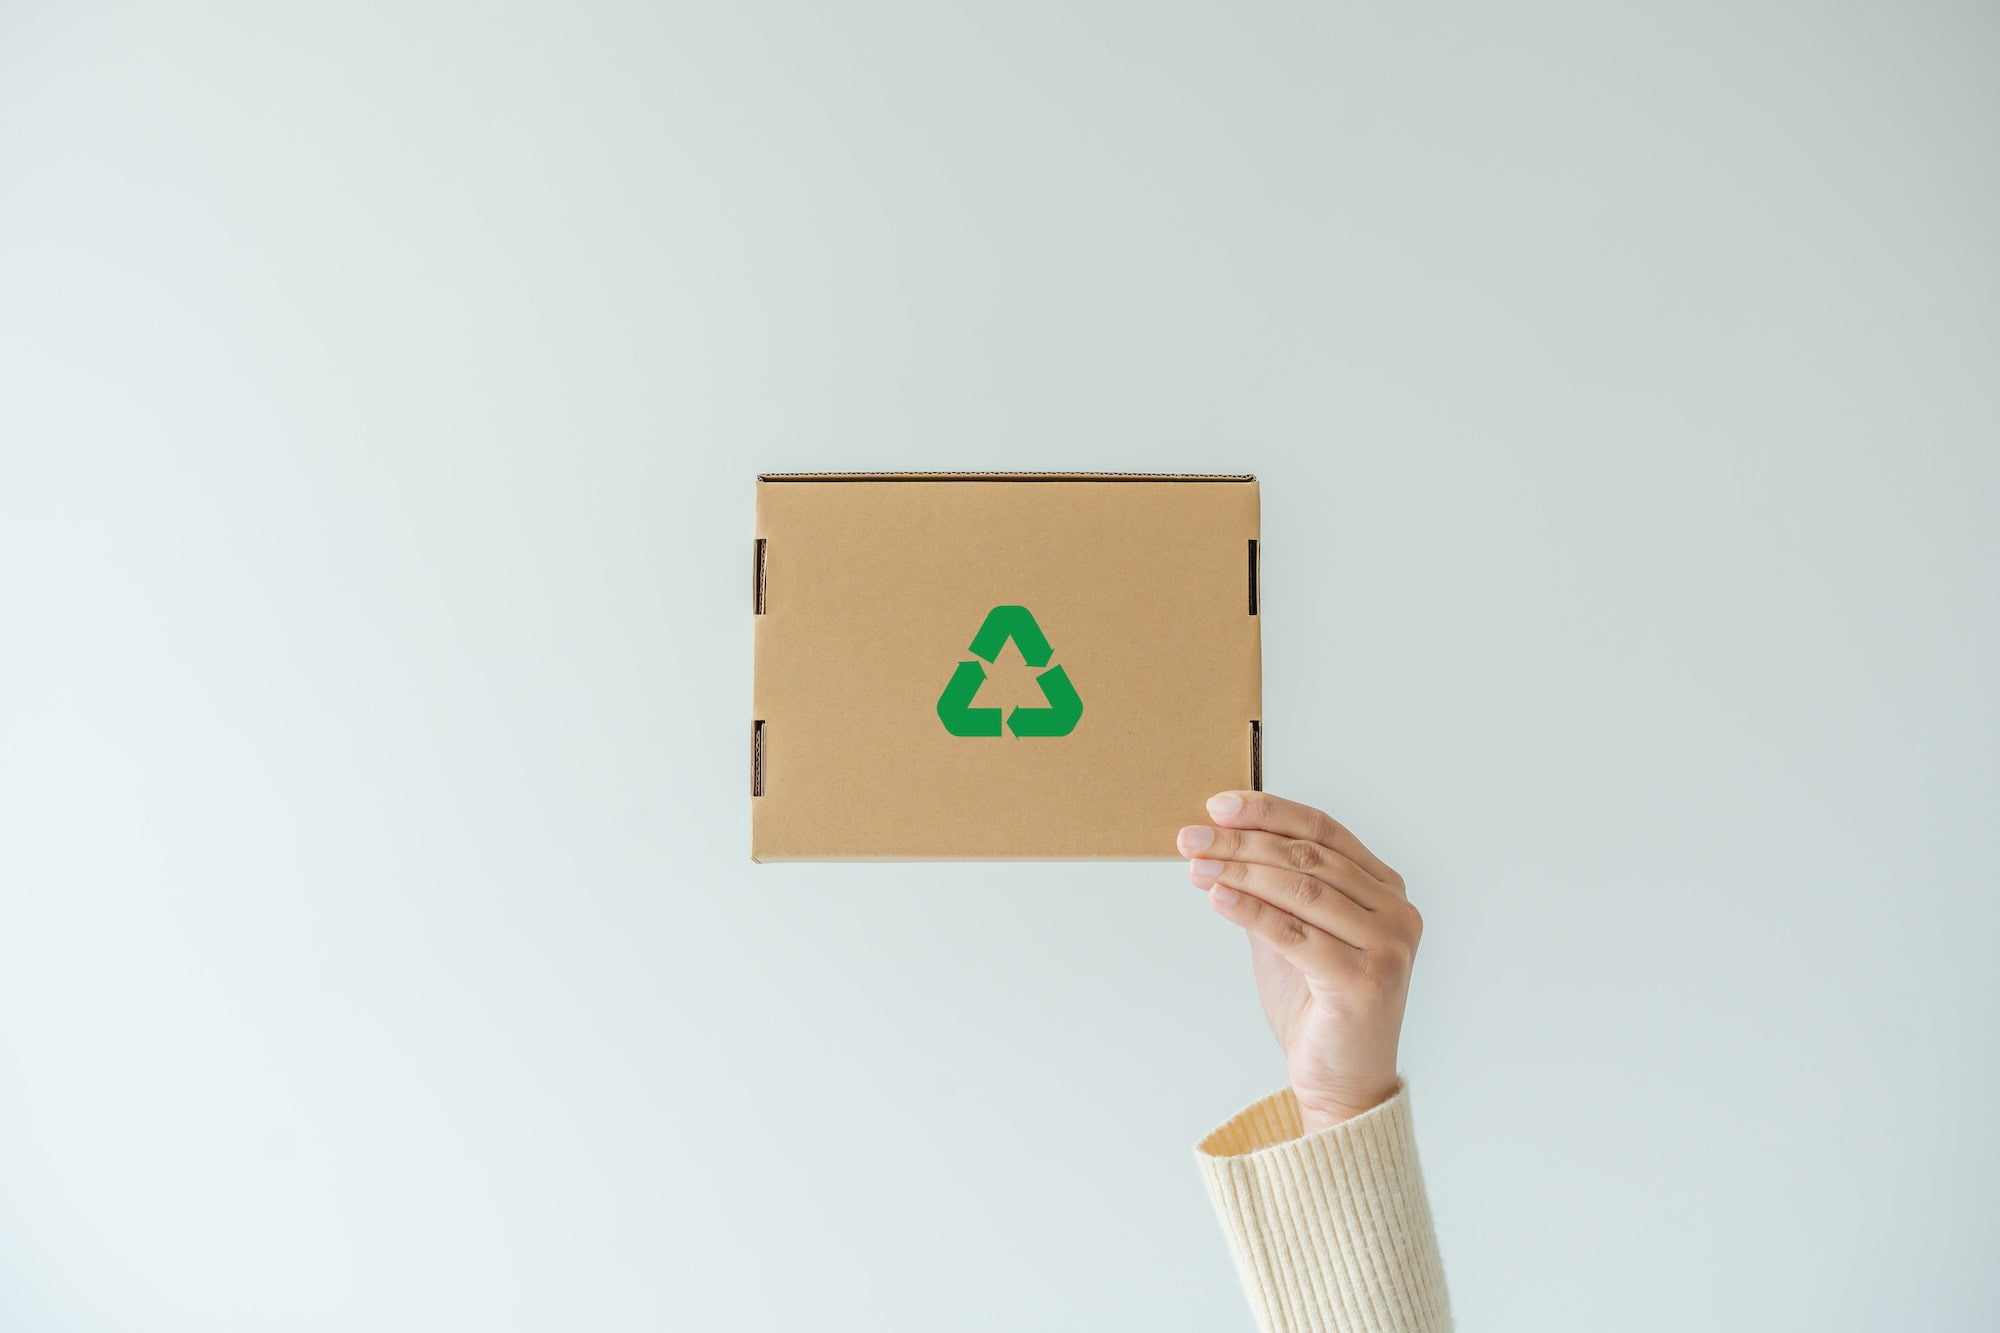 A woman holding up a cardboard box with a recycle symbol on it.